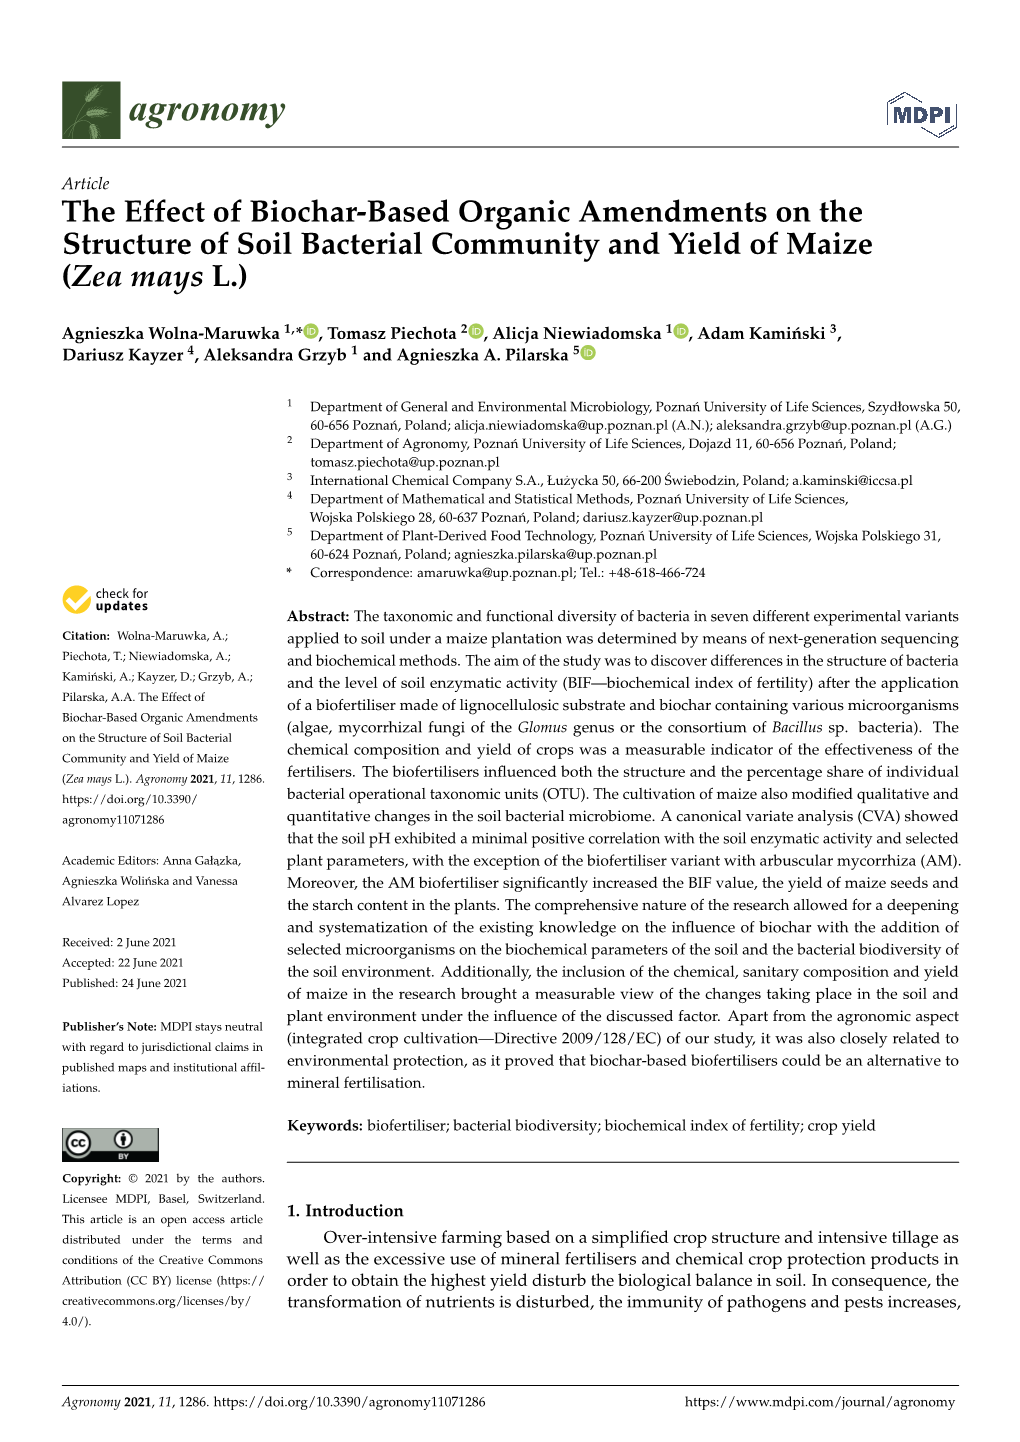 The Effect of Biochar-Based Organic Amendments on the Structure of Soil Bacterial Community and Yield of Maize (Zea Mays L.)